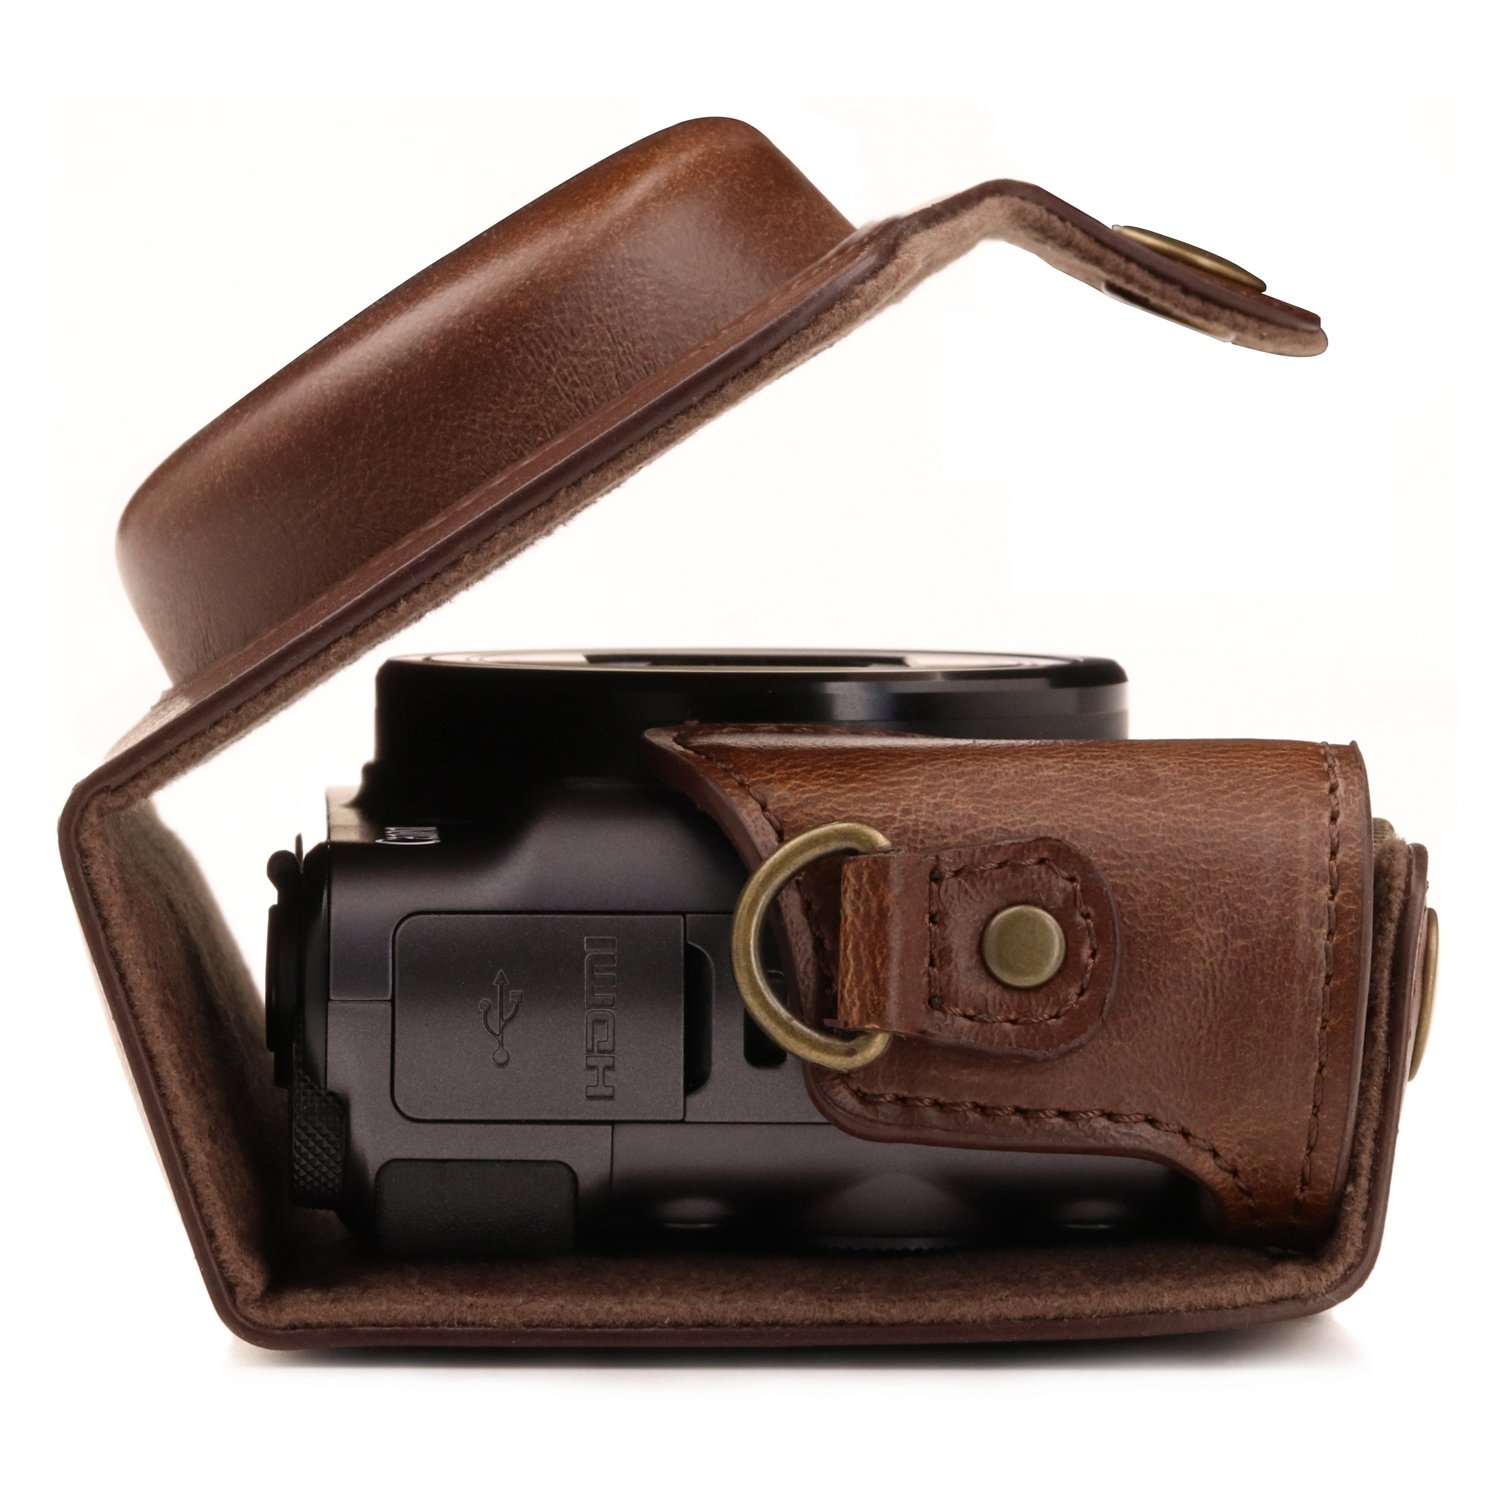 MegaGear MG1174 Canon PowerShot SX740 HS, SX730 HS Ever Ready Leather Camera Case with Strap - Dark Brown